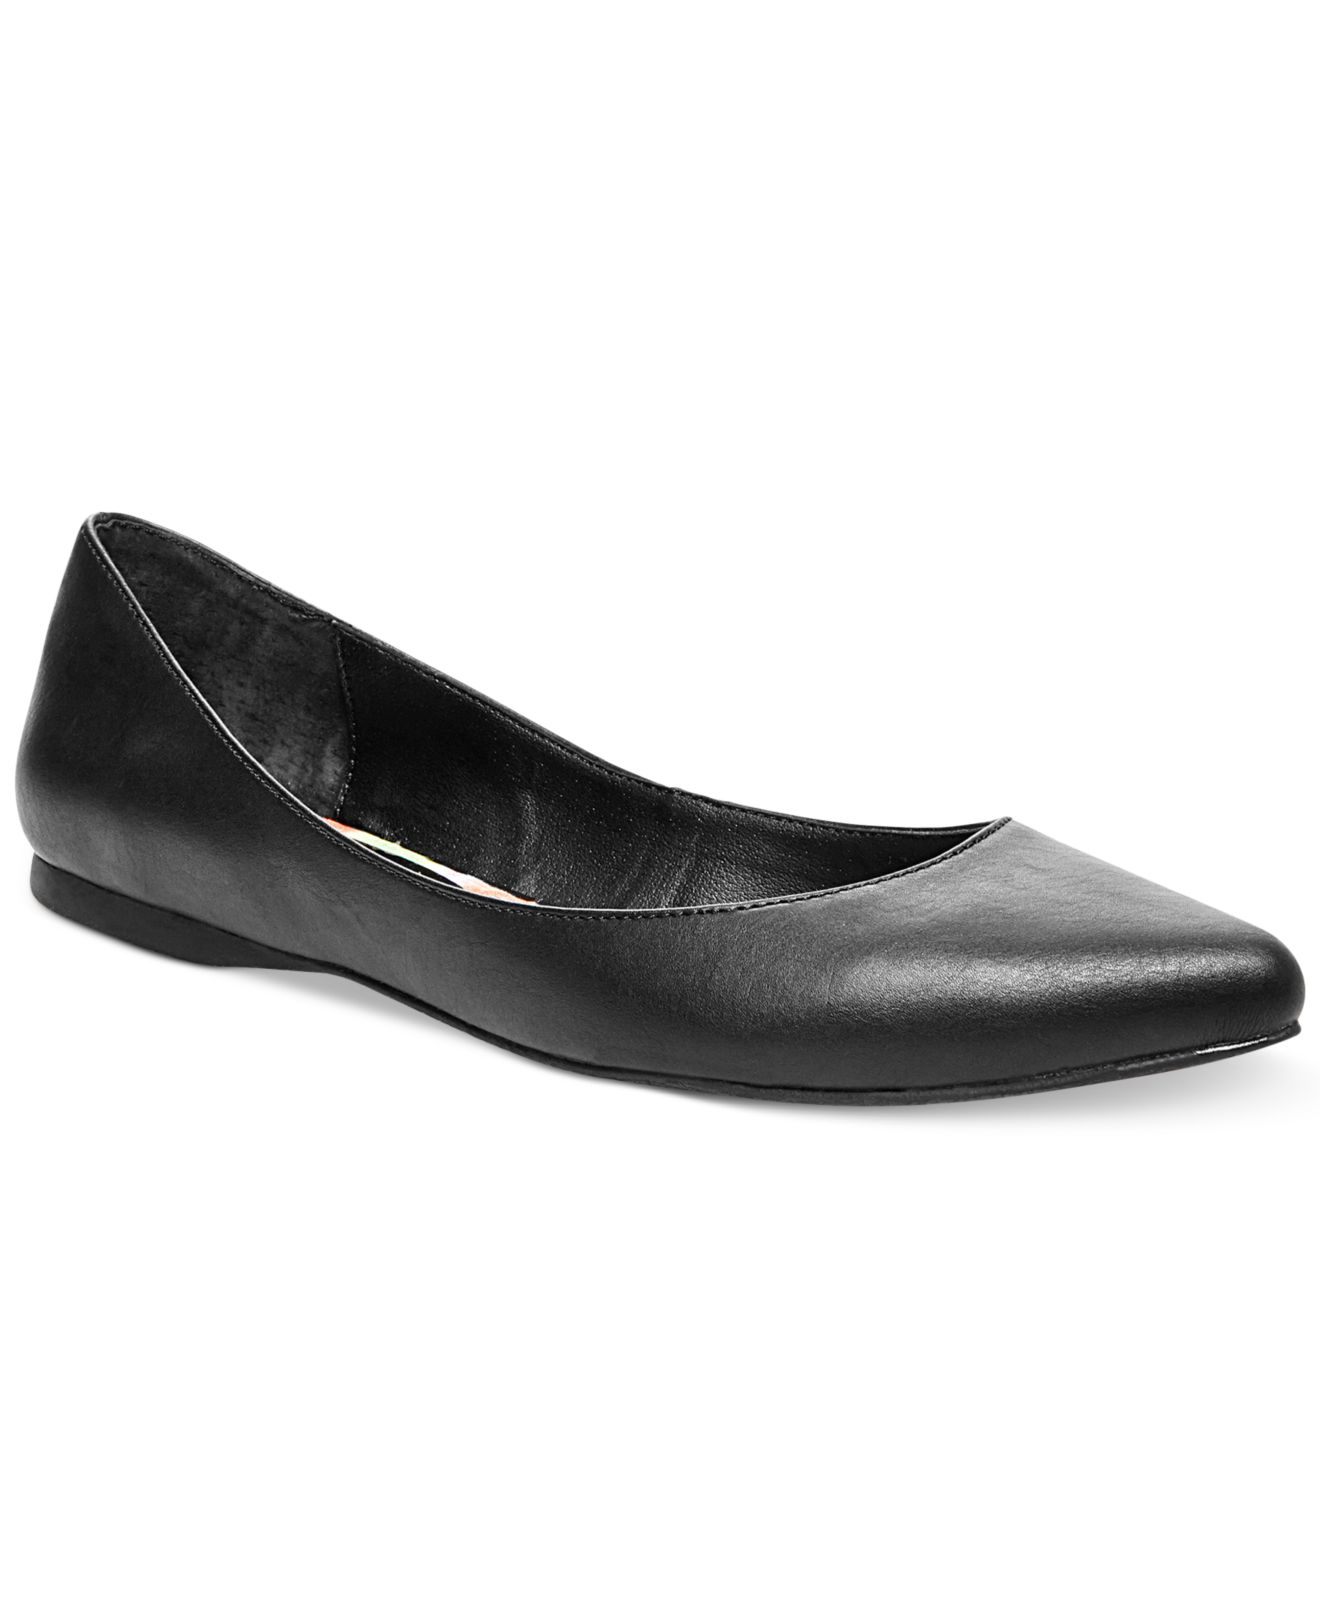 Madden Girl Encouter Flats in Black - Lyst